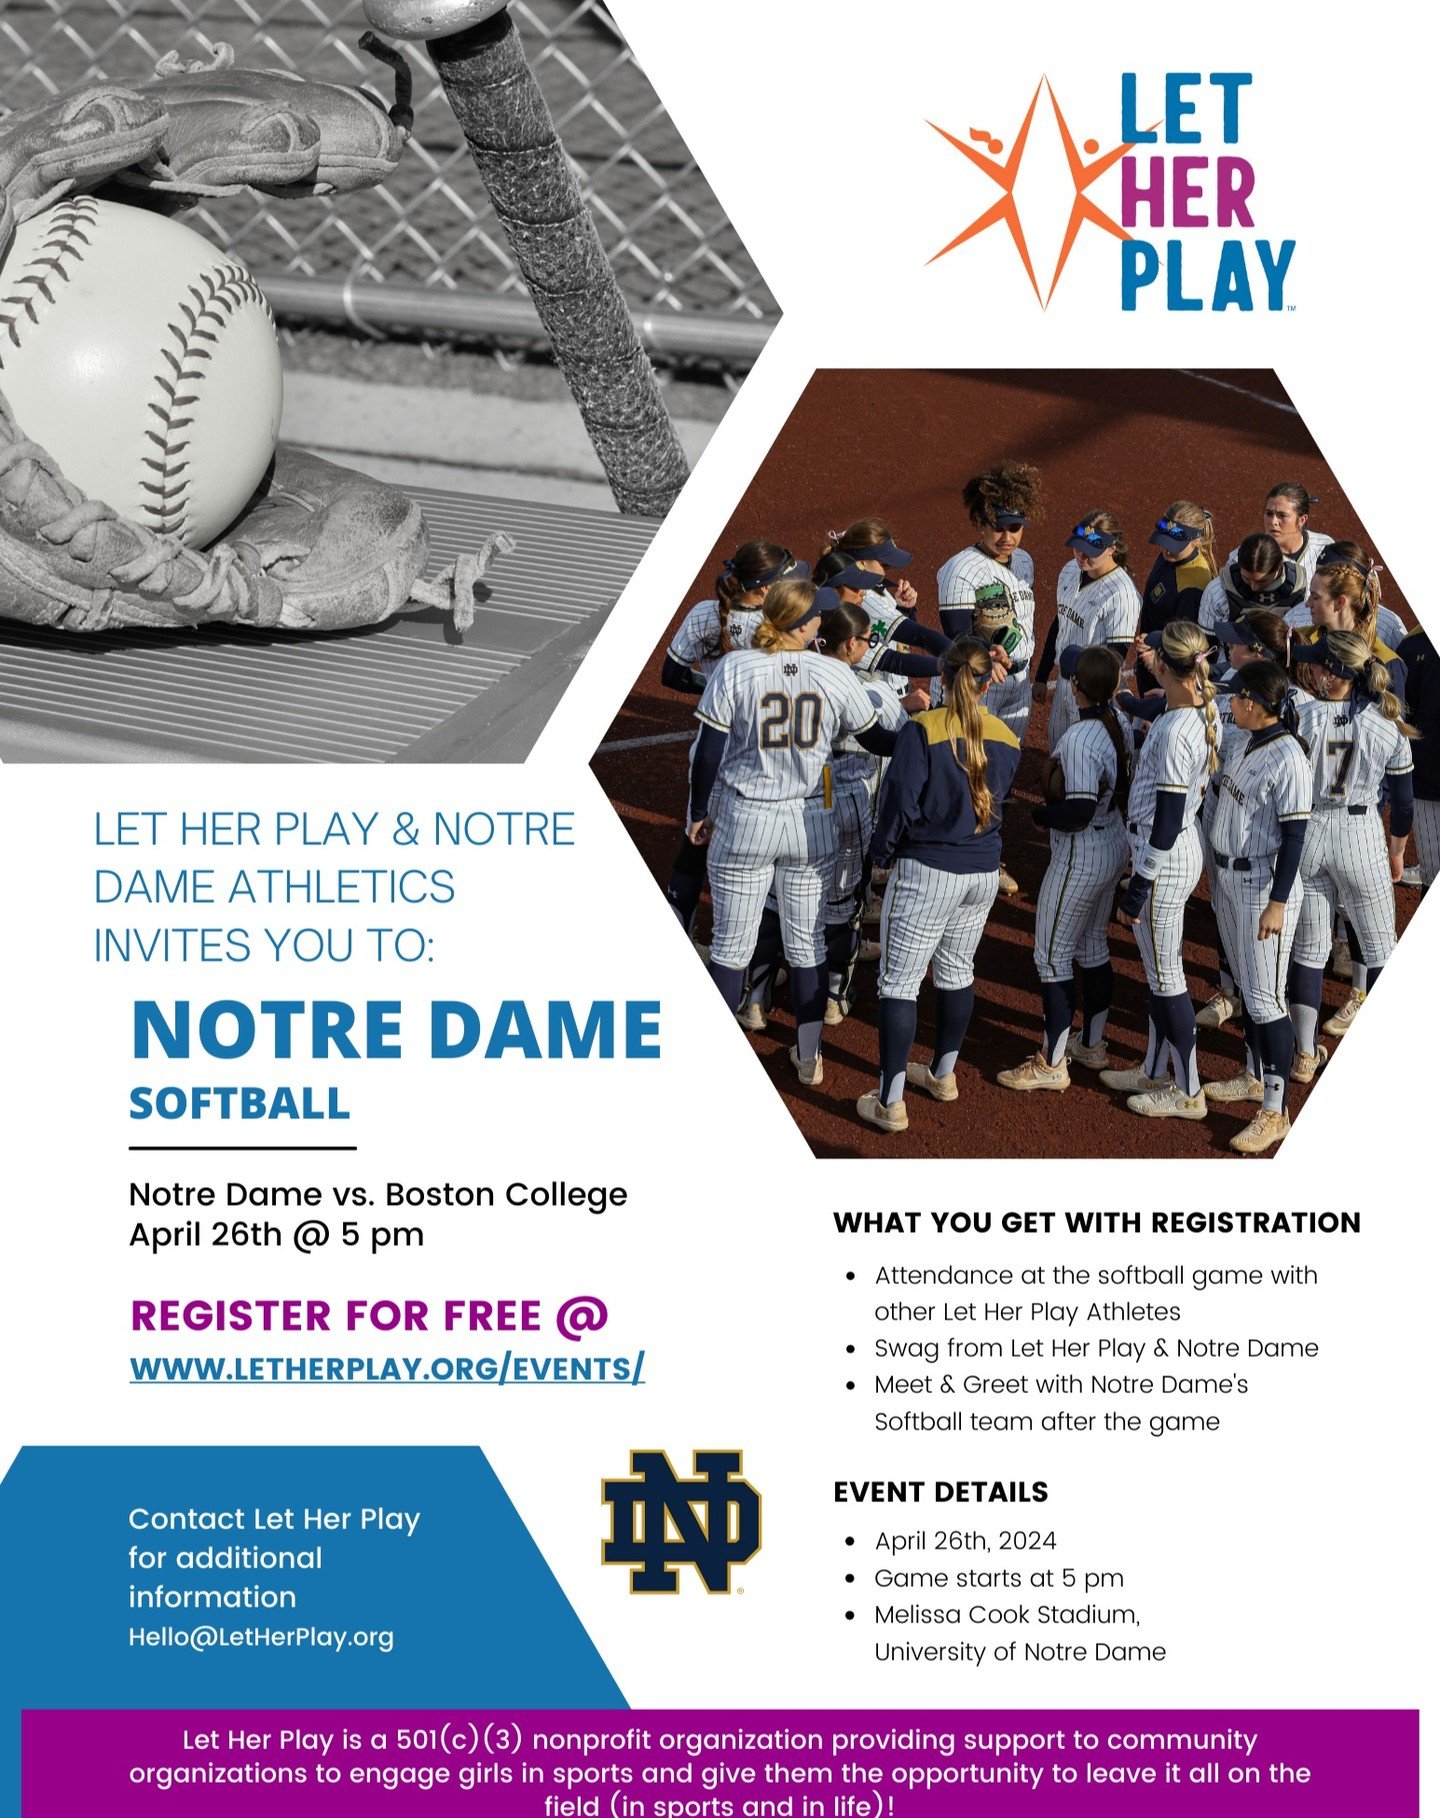 Join Let Her Play and @thefightingirish as @notredamesoftball takes on Boston College on Friday, 4/26 at 5pm.

Register for FREE with Let Her Play to attend the game, meet the Notre Dame team after the game + take home some swag from Let Her Play and